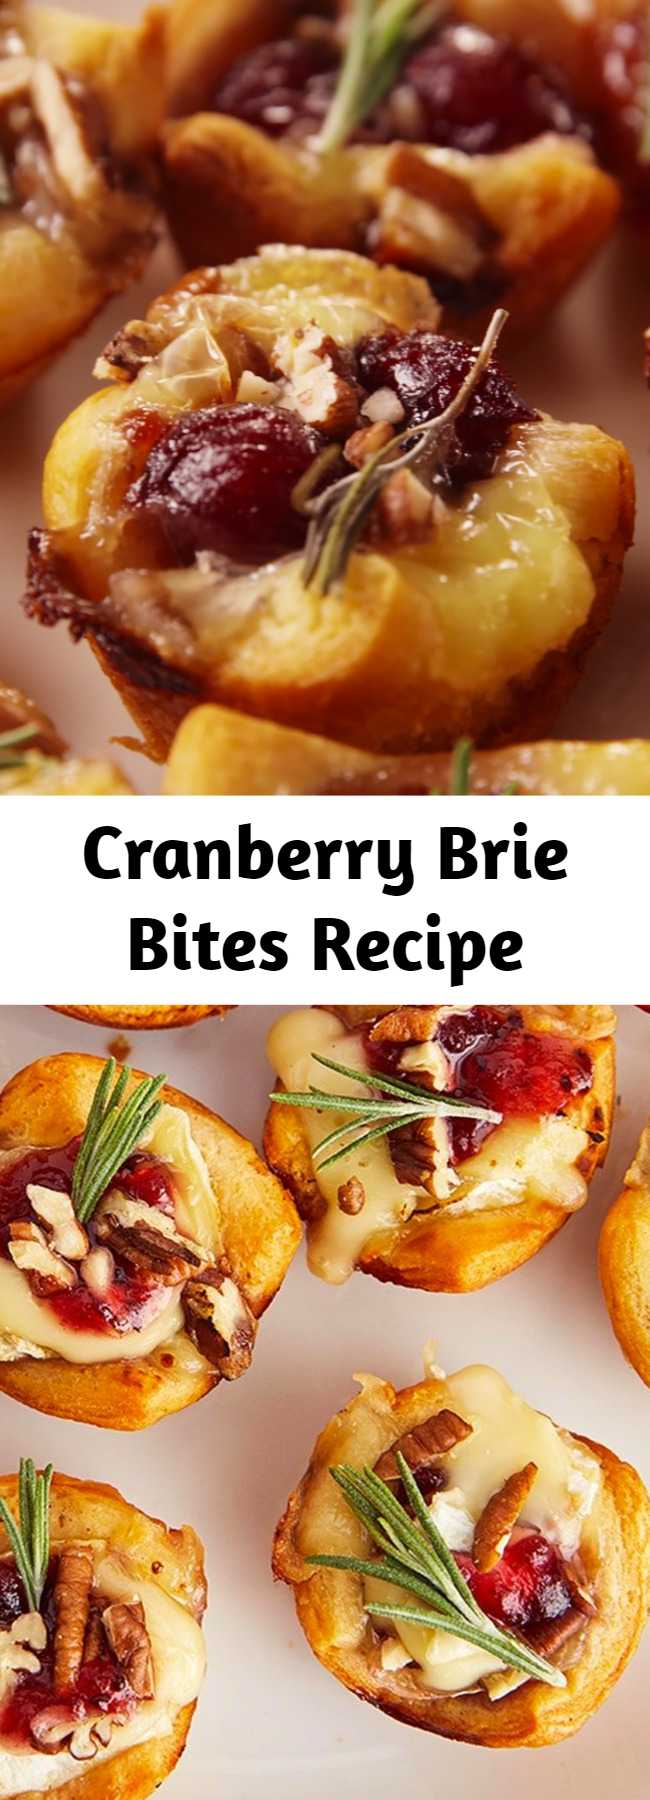 Cranberry Brie Bites Recipe - These little guys are the perfect appetizer to make during the holidays. Not only do they come together in seconds, they disappear in seconds too! Canned cranberries work great, but if you've got homemade cranberry sauce leftover, use it! #food #comfortfood #holiday #lunch #dinner #easyrecipe #recipe #inspiration #ideas #home